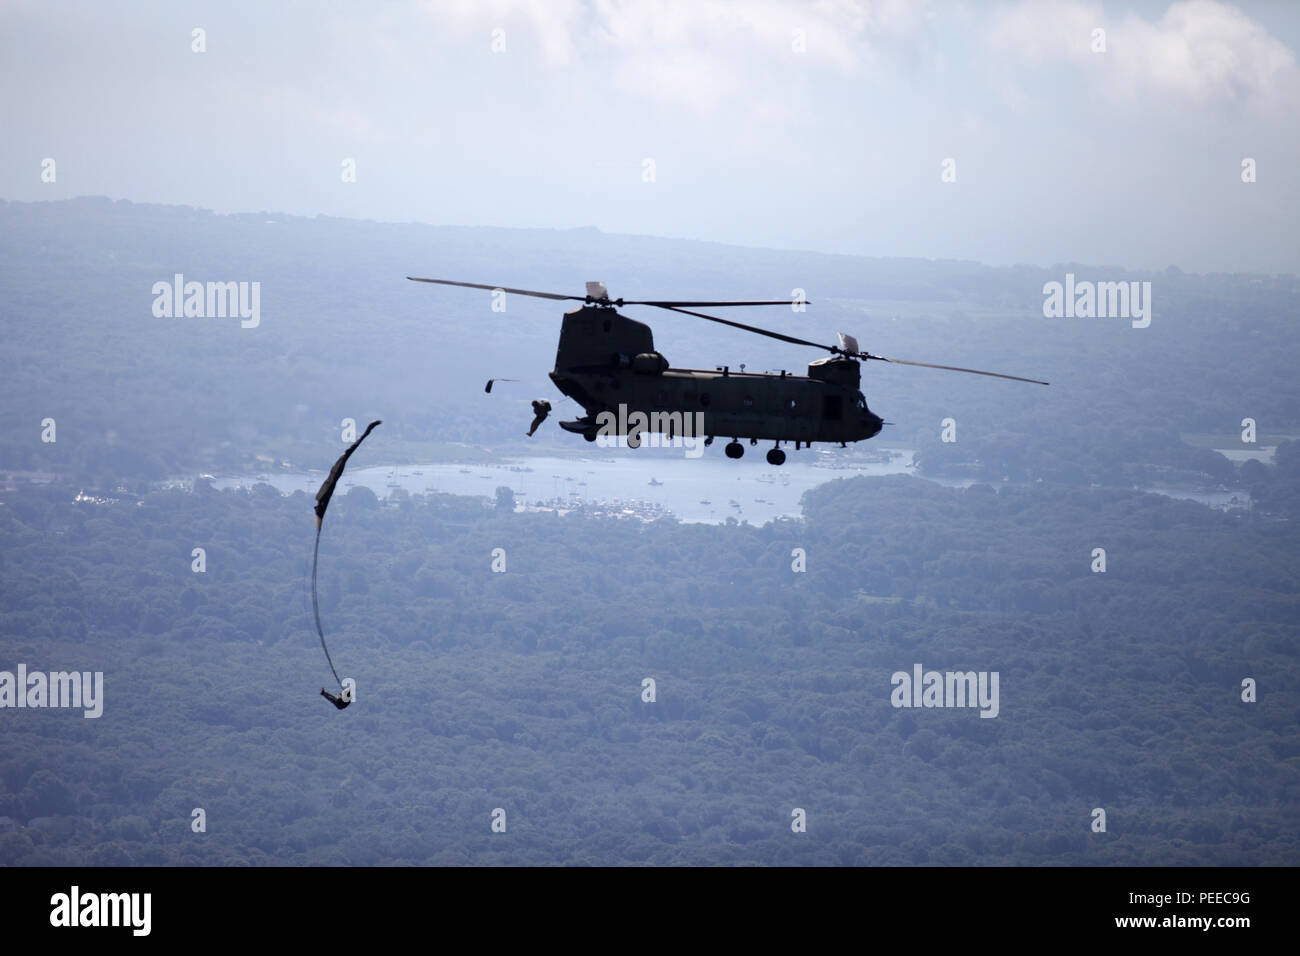 Paratroopers jump from a CH-47 Chinook helicopter for a wing exchange jump at Leapfest in West Kingston, R.I., Aug. 3, 2015. Leapfest is an International parachute competition hosted by the 56th Troop Command, Rhode Island National Guard to promote high level technical training and esprit de corps within the International Airborne community. (U.S. Army Photo by Spc. Josephine Carlson/Released) Stock Photo